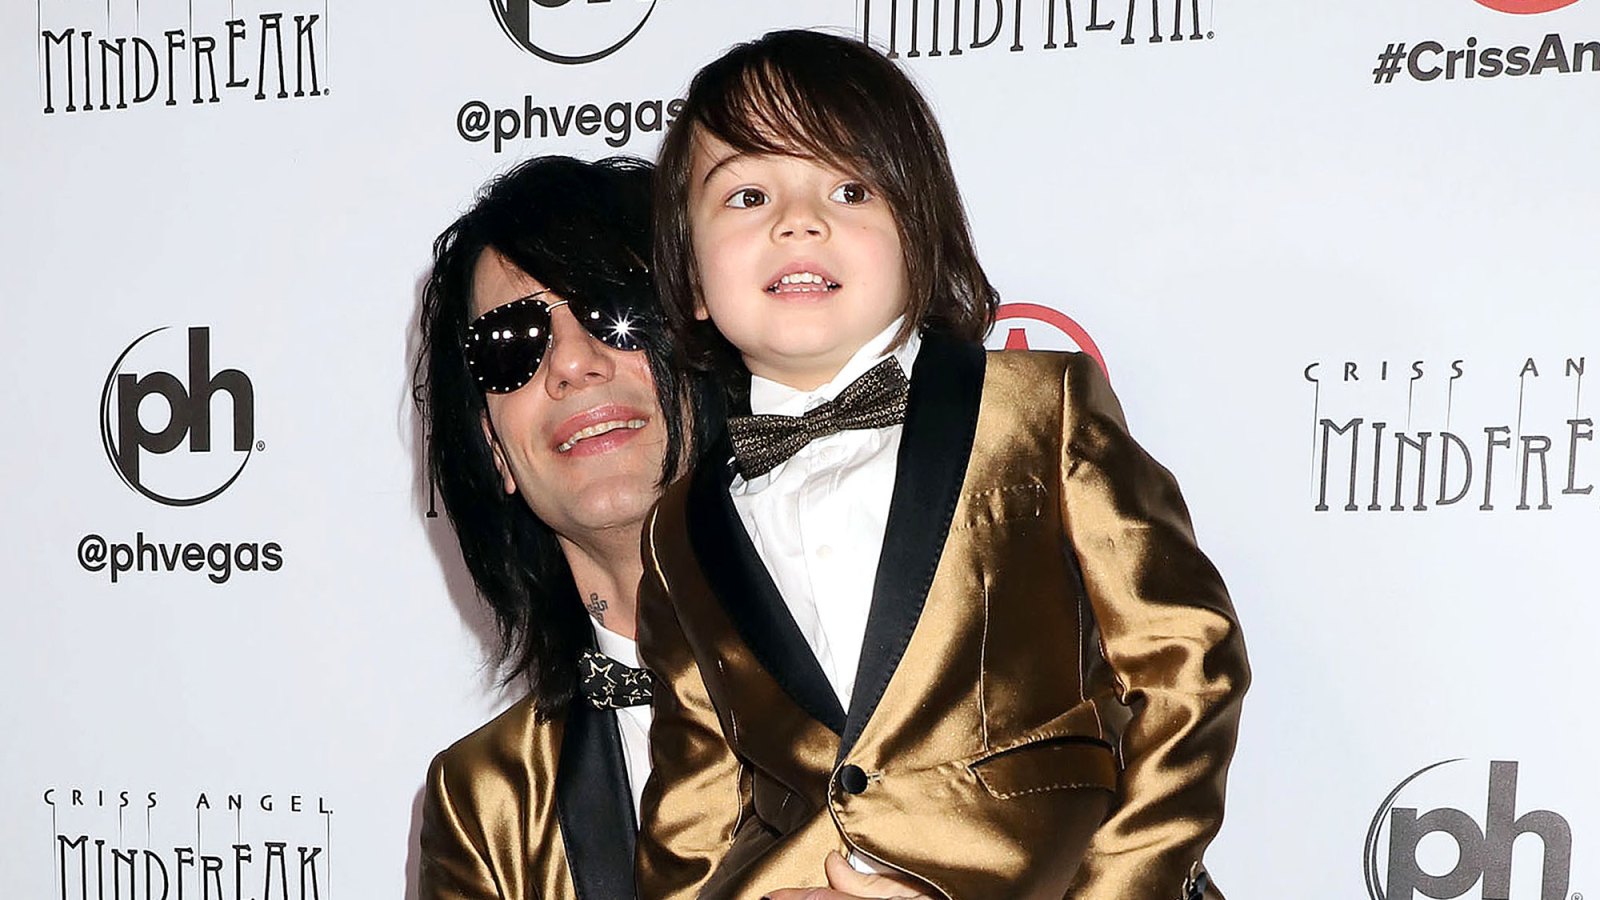 Criss Angel Announces His 7-Year-Old Son Johnny Is in Remission After Cancer Diagnosis